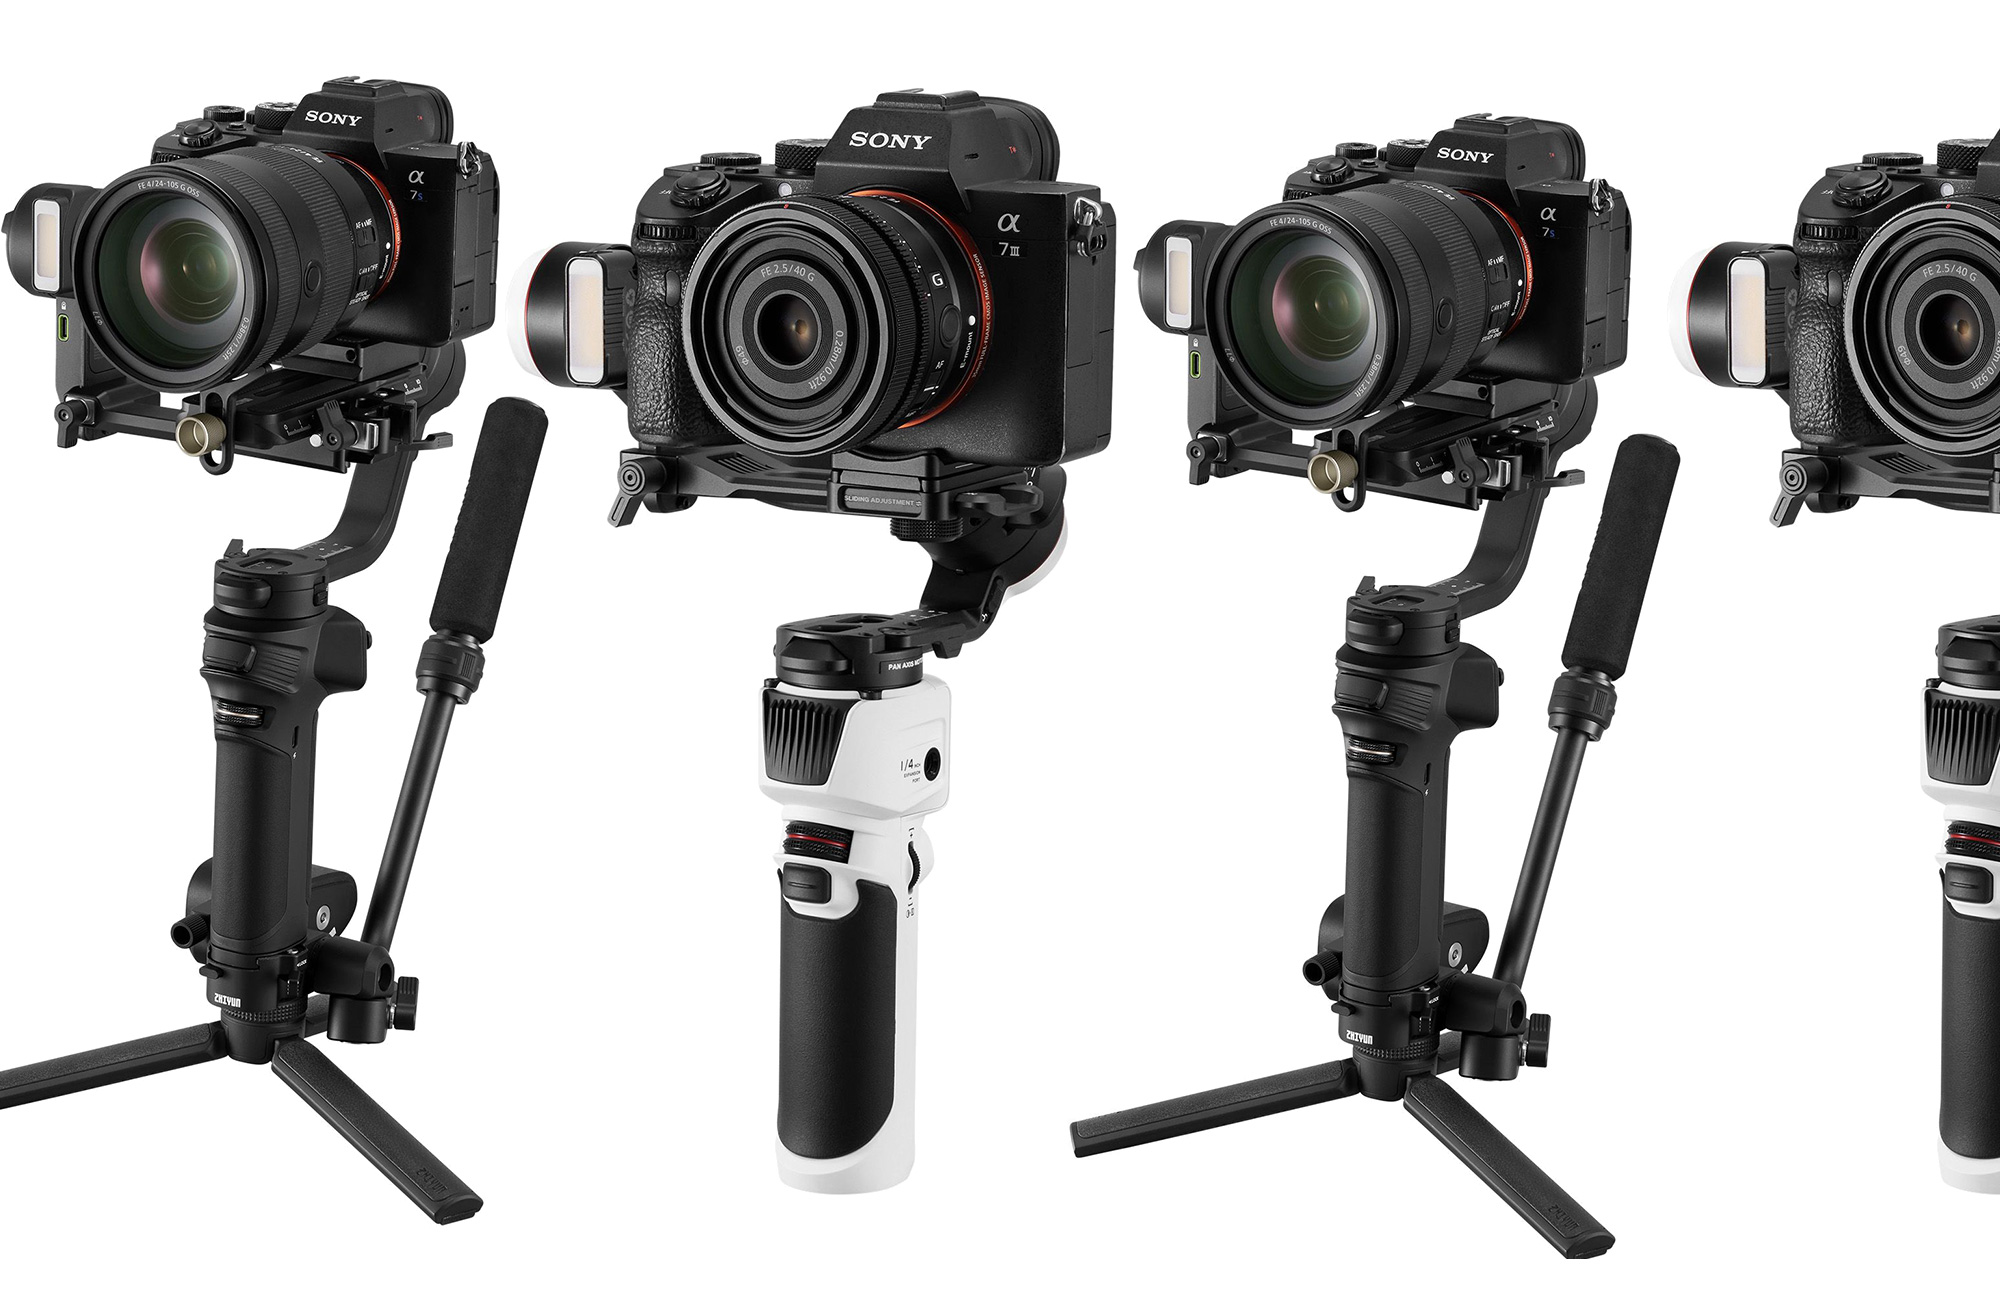 Zhiyun releases new Crane-M 3S and Weebill 3S gimbals for smooth video